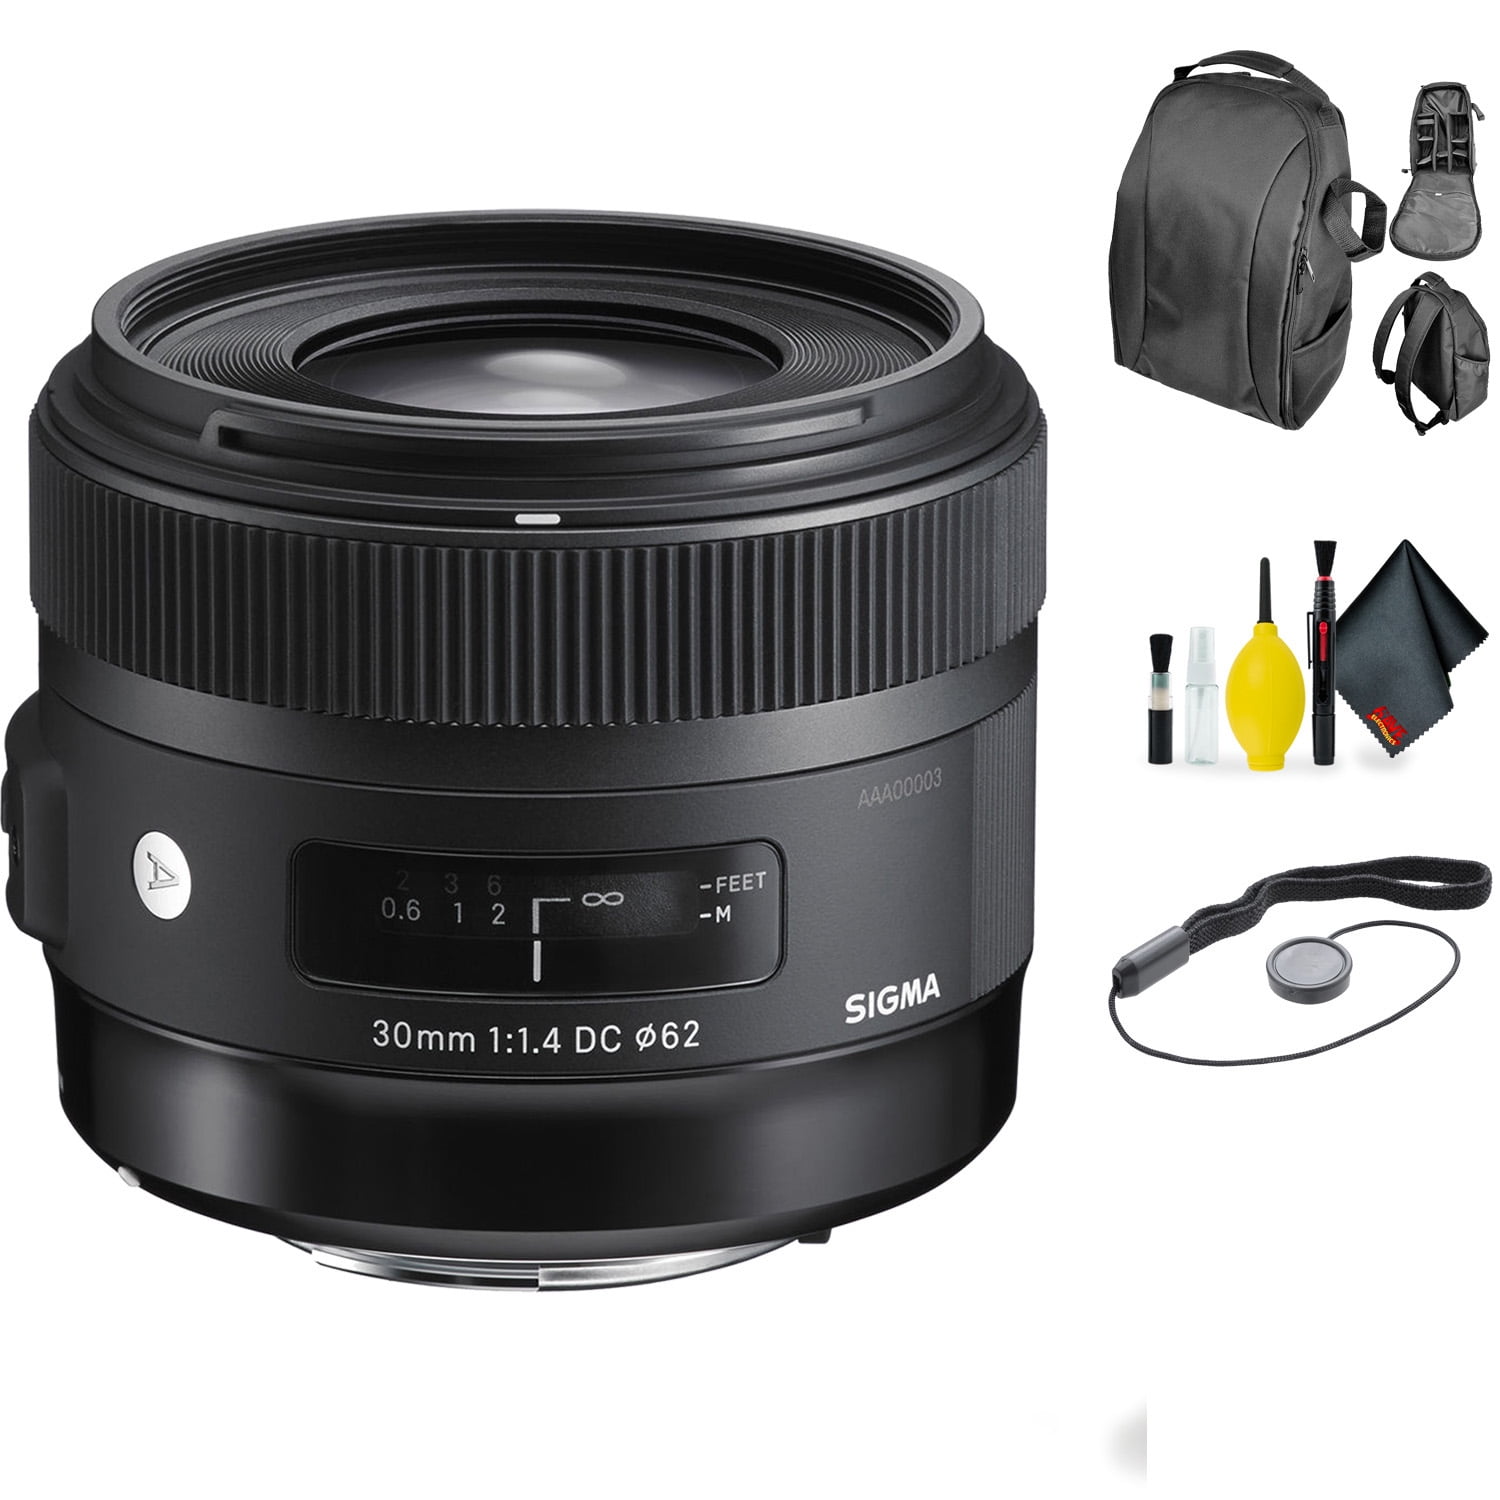 Sigma 30mm f/1.4 DC HSM Art Lens for Canon + Deluxe Lens Cleaning